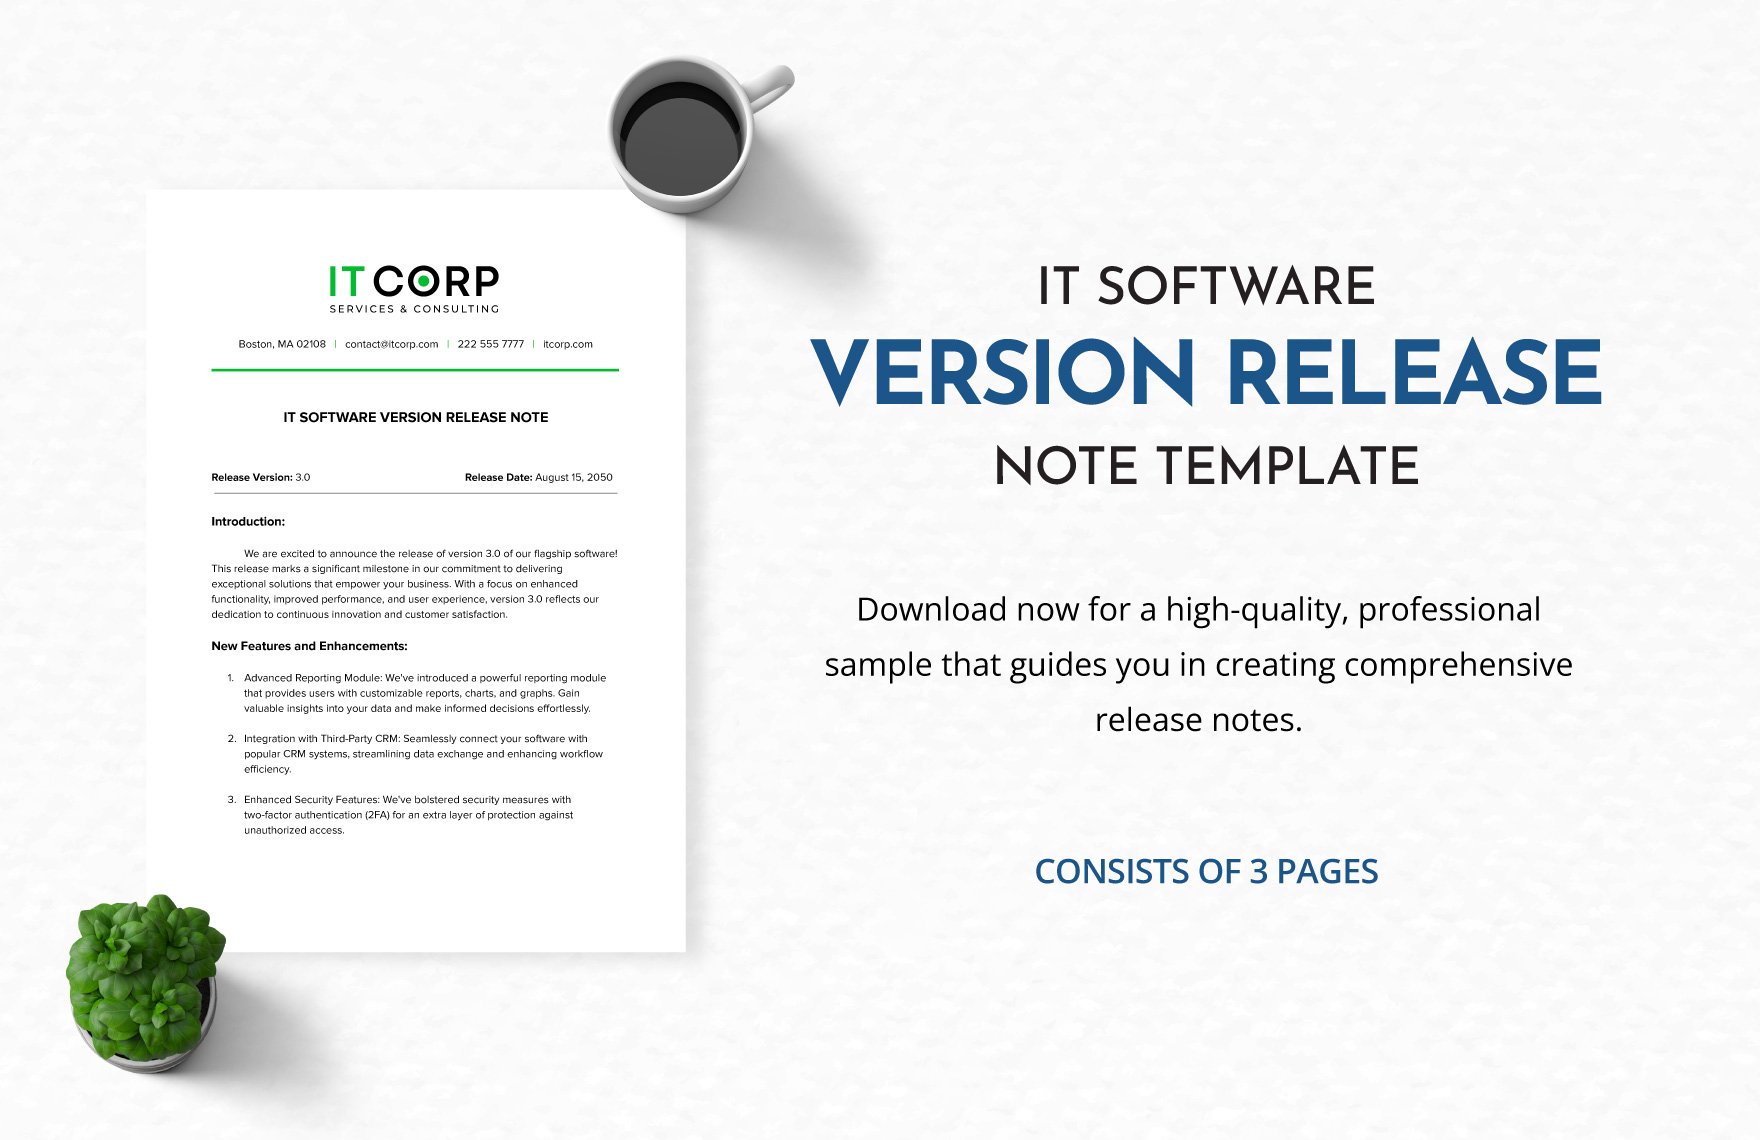 IT Software Version Release Note Template